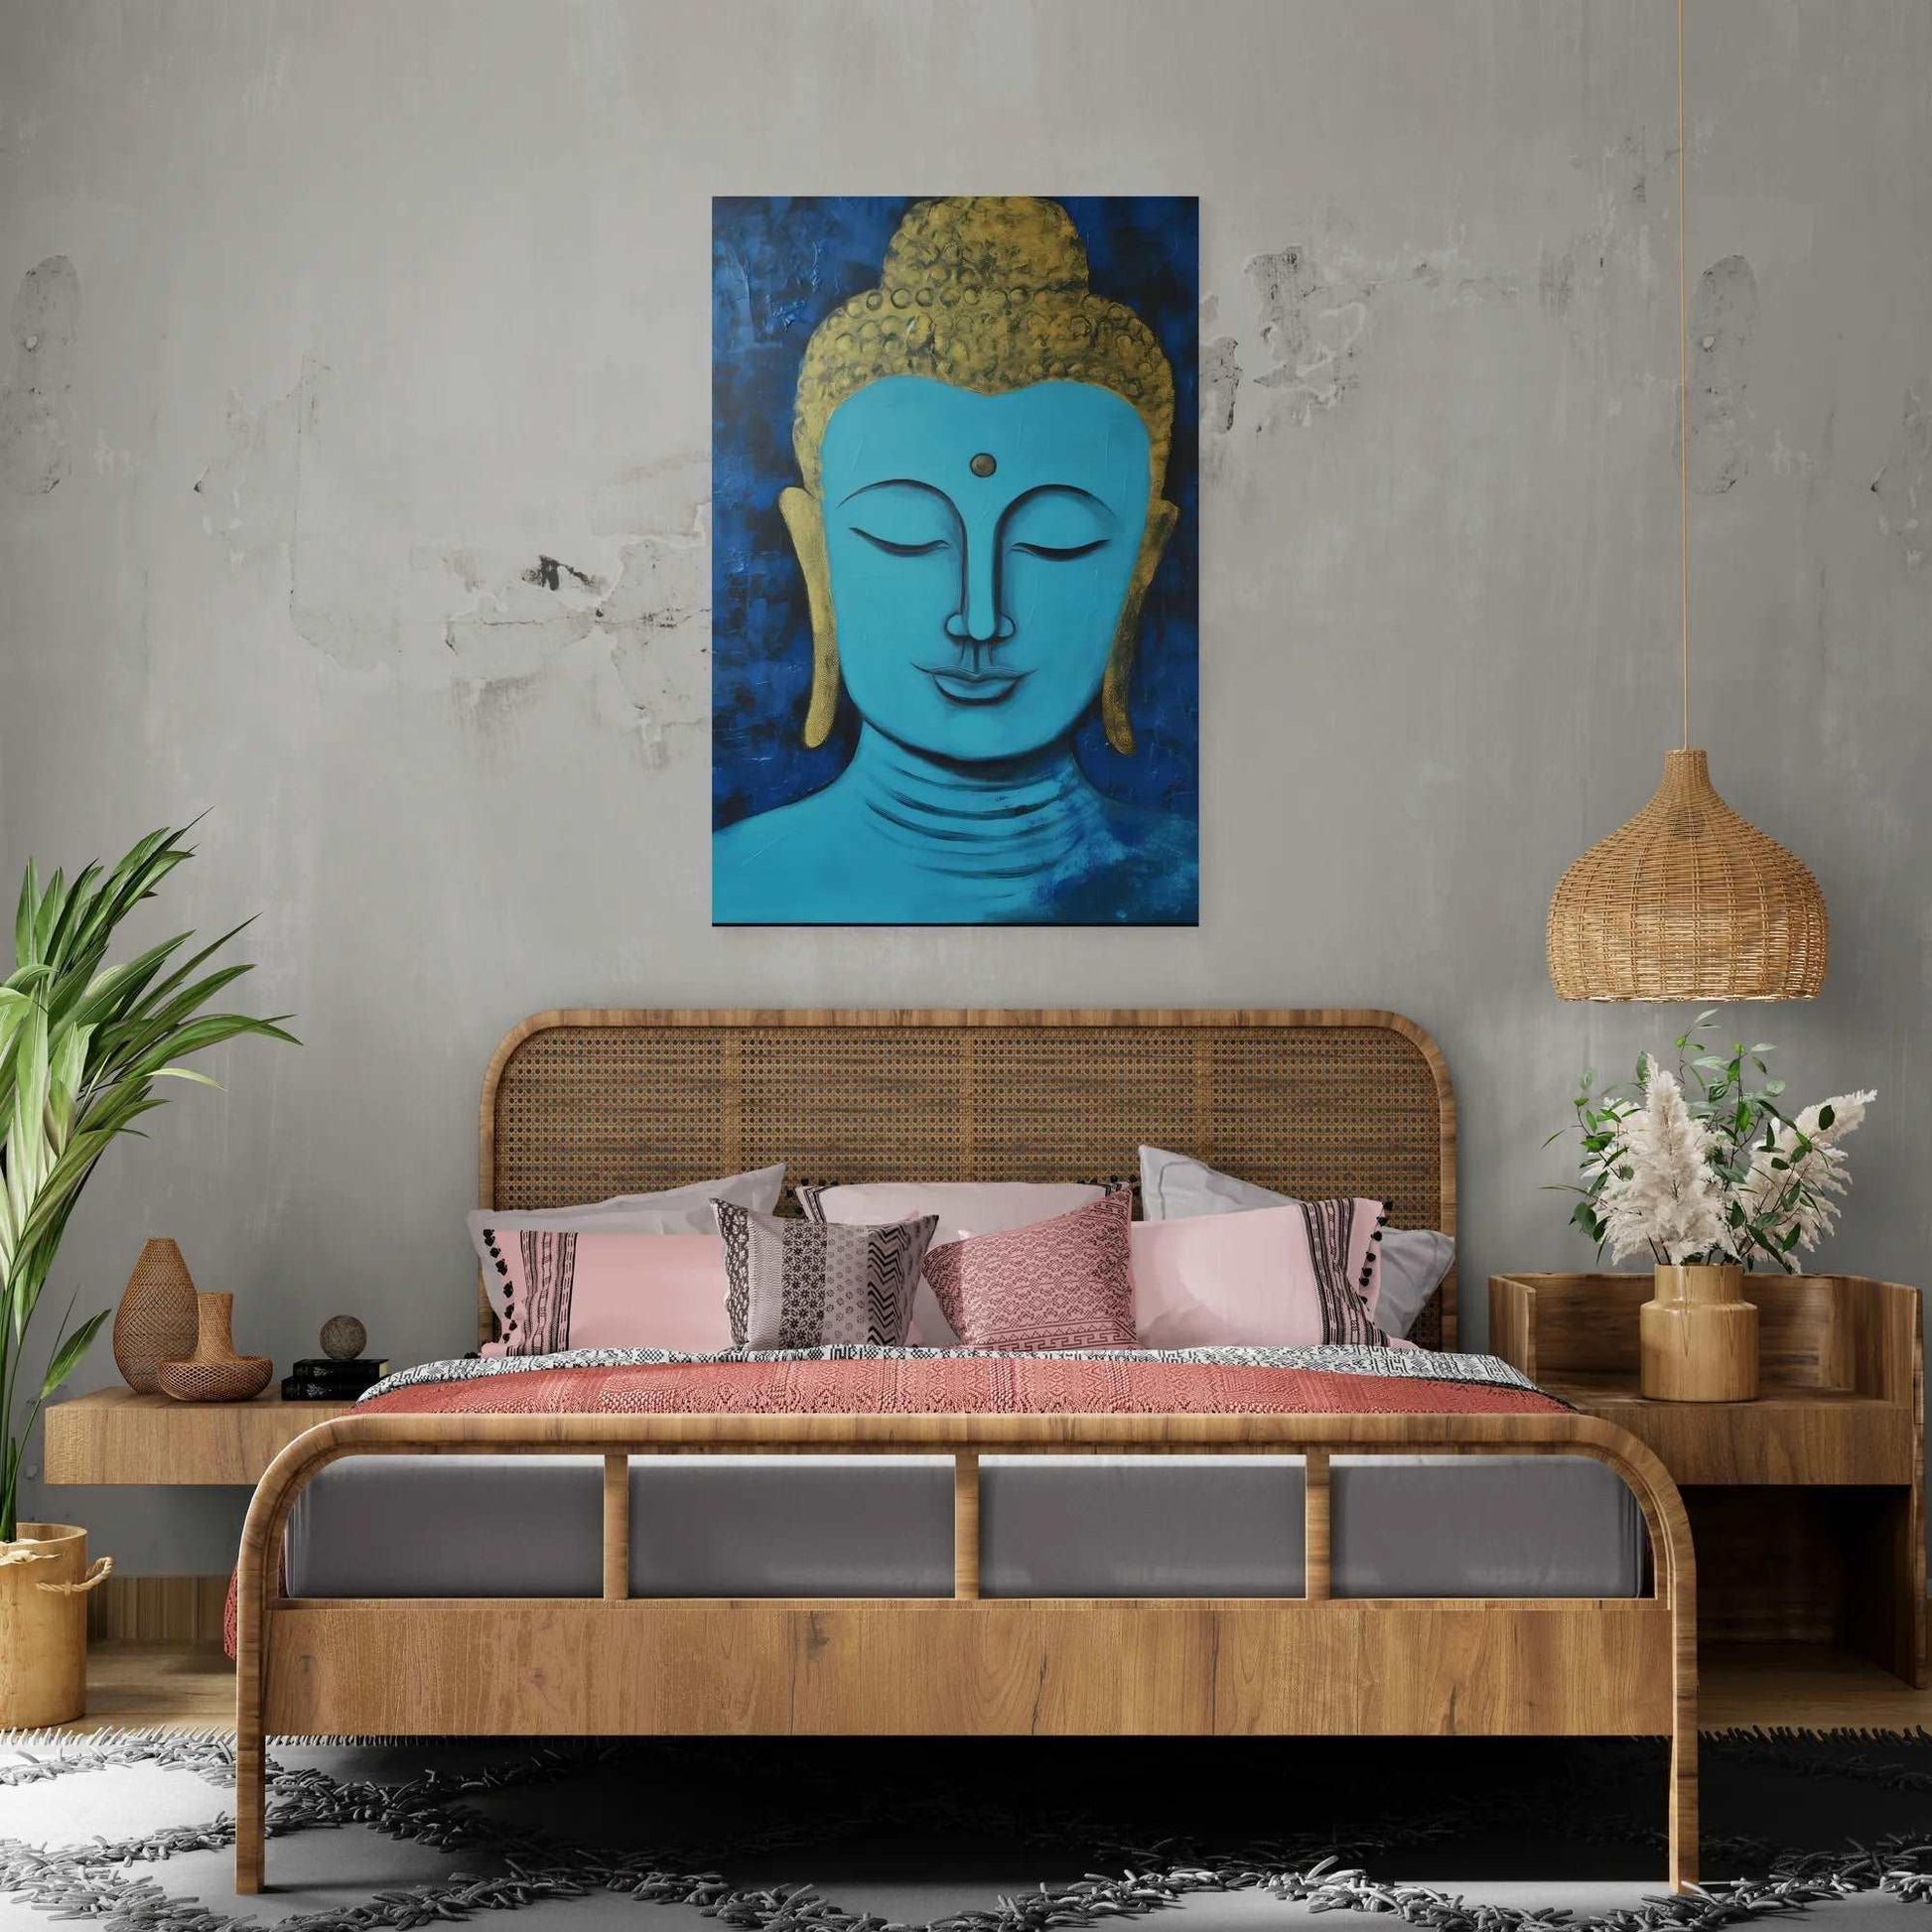 Buddha artwork above a rattan bed frame, accompanied by pink and gray pillows, blending tranquility with contemporary bedroom decor.